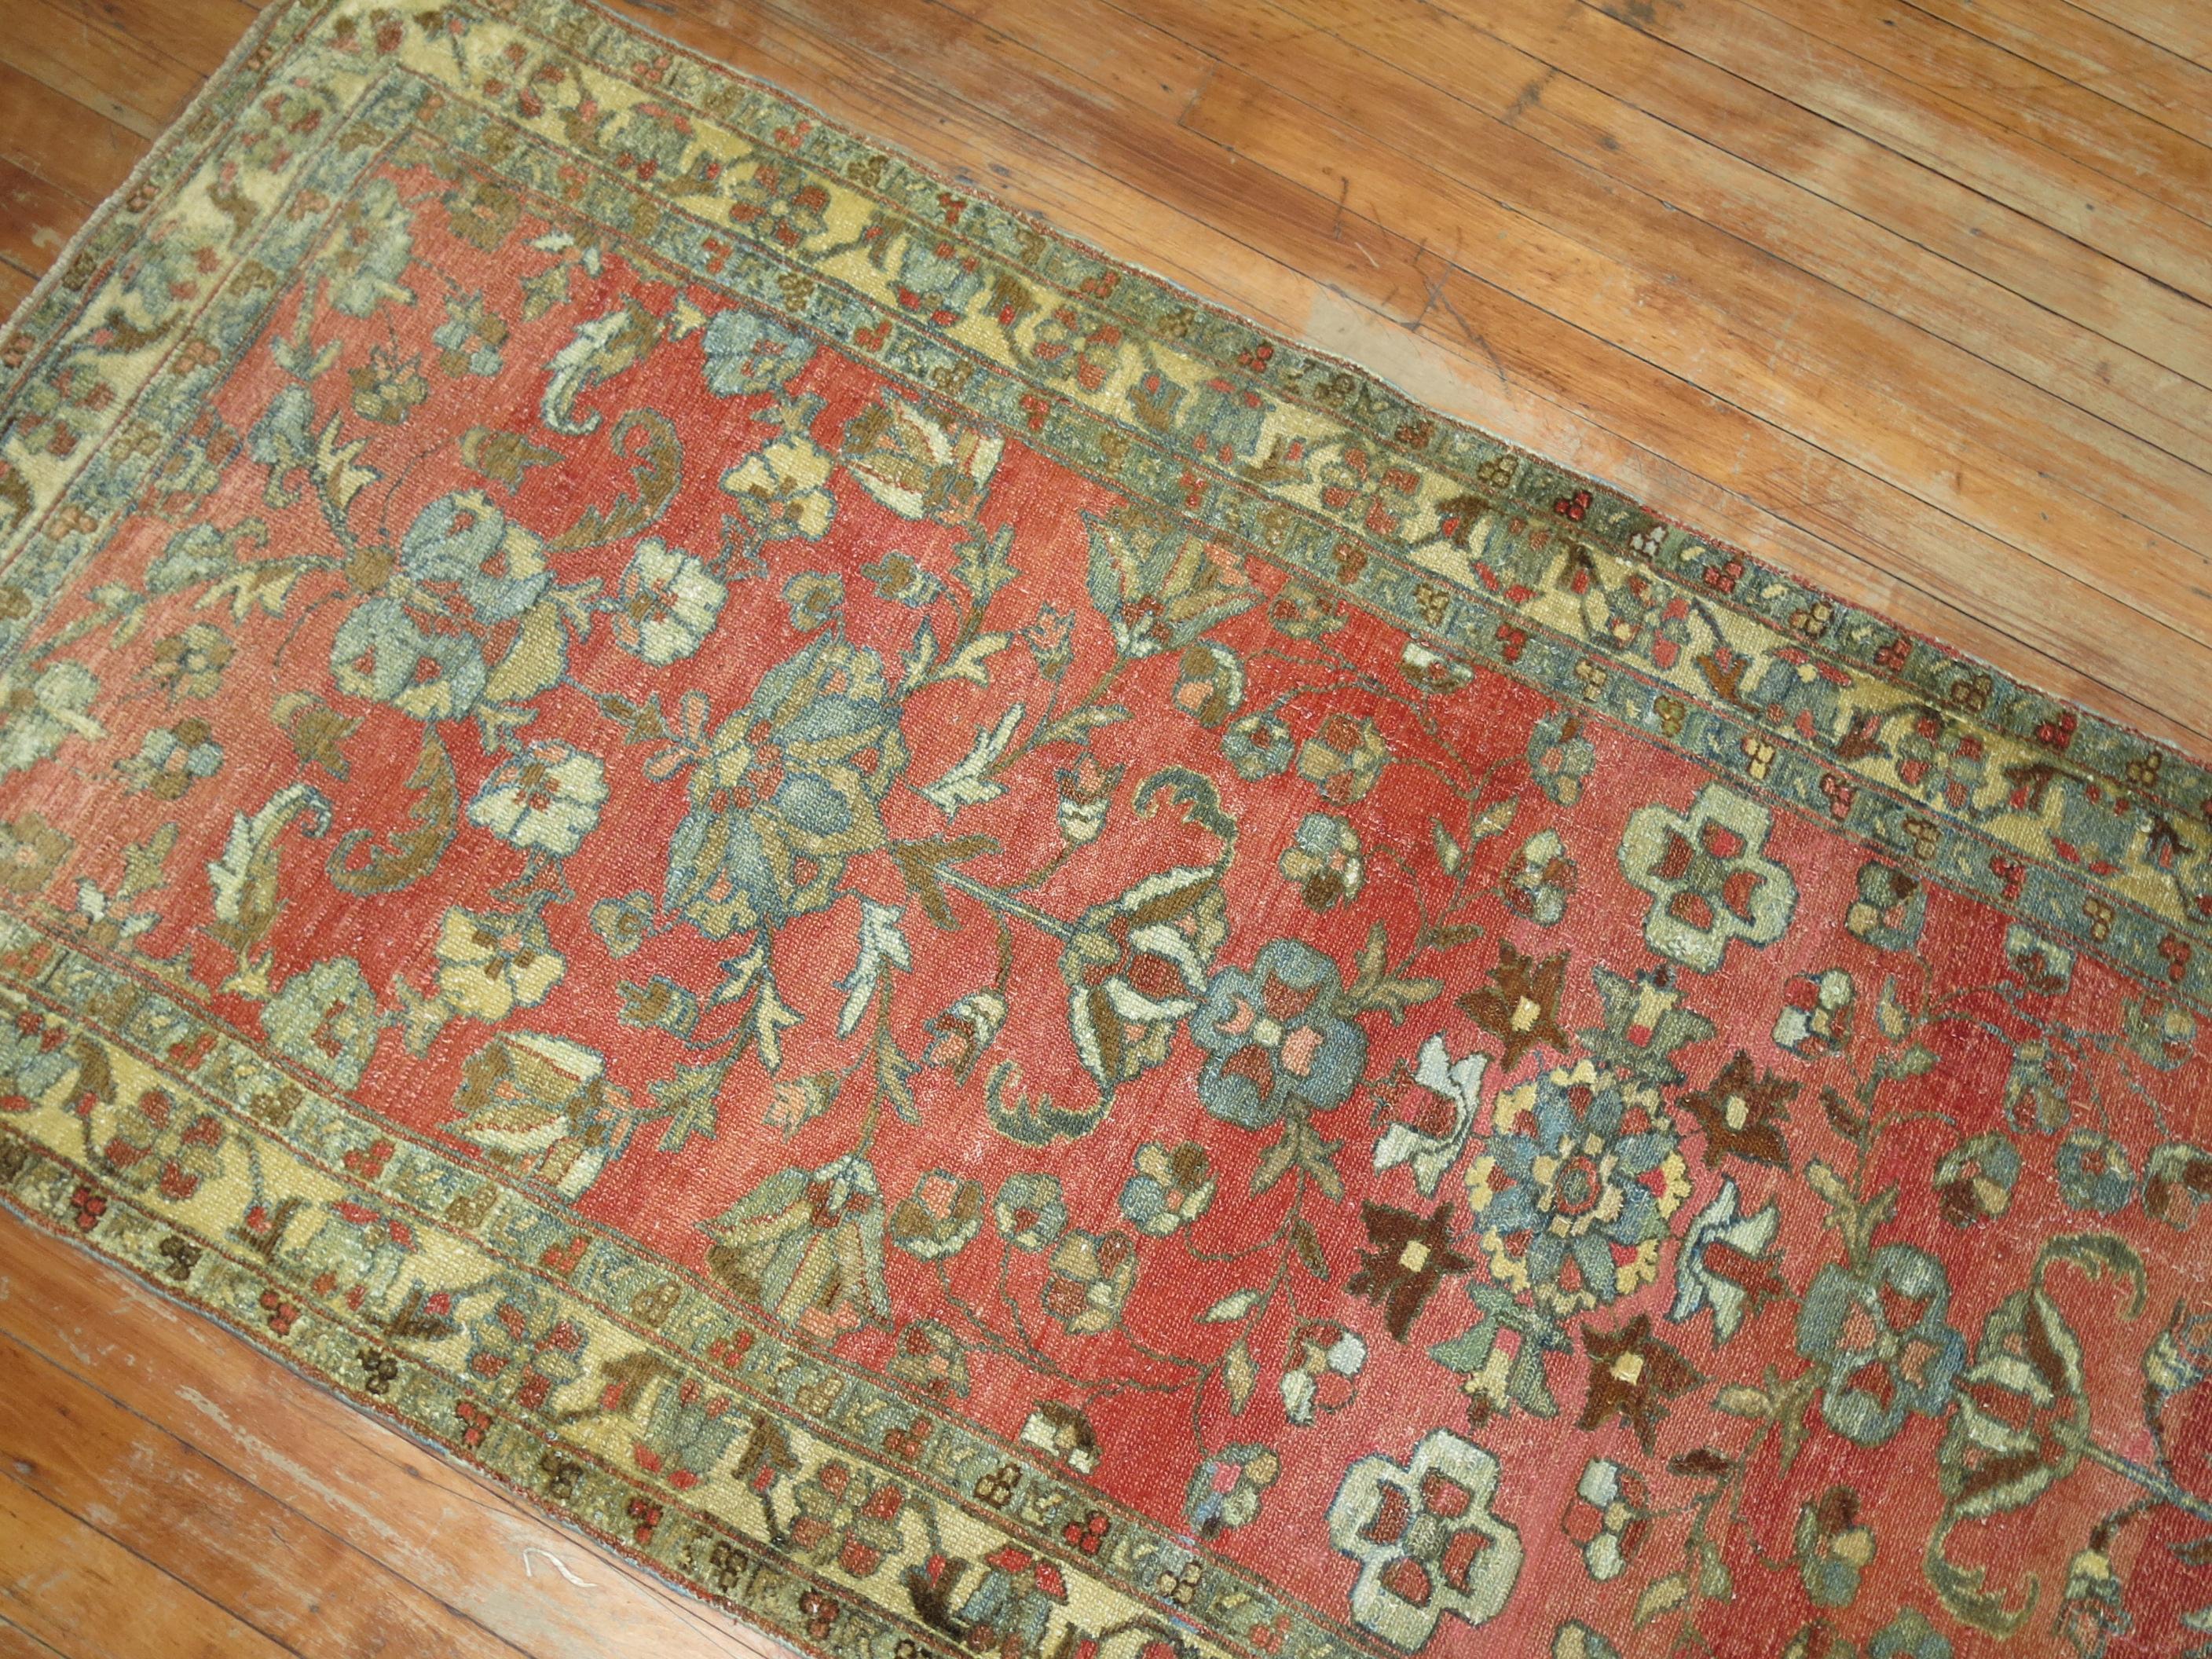 A long and narrow traditional Persian Malayer runner from the early 20th century. Need a long hallway for this!

Measures: 2'9